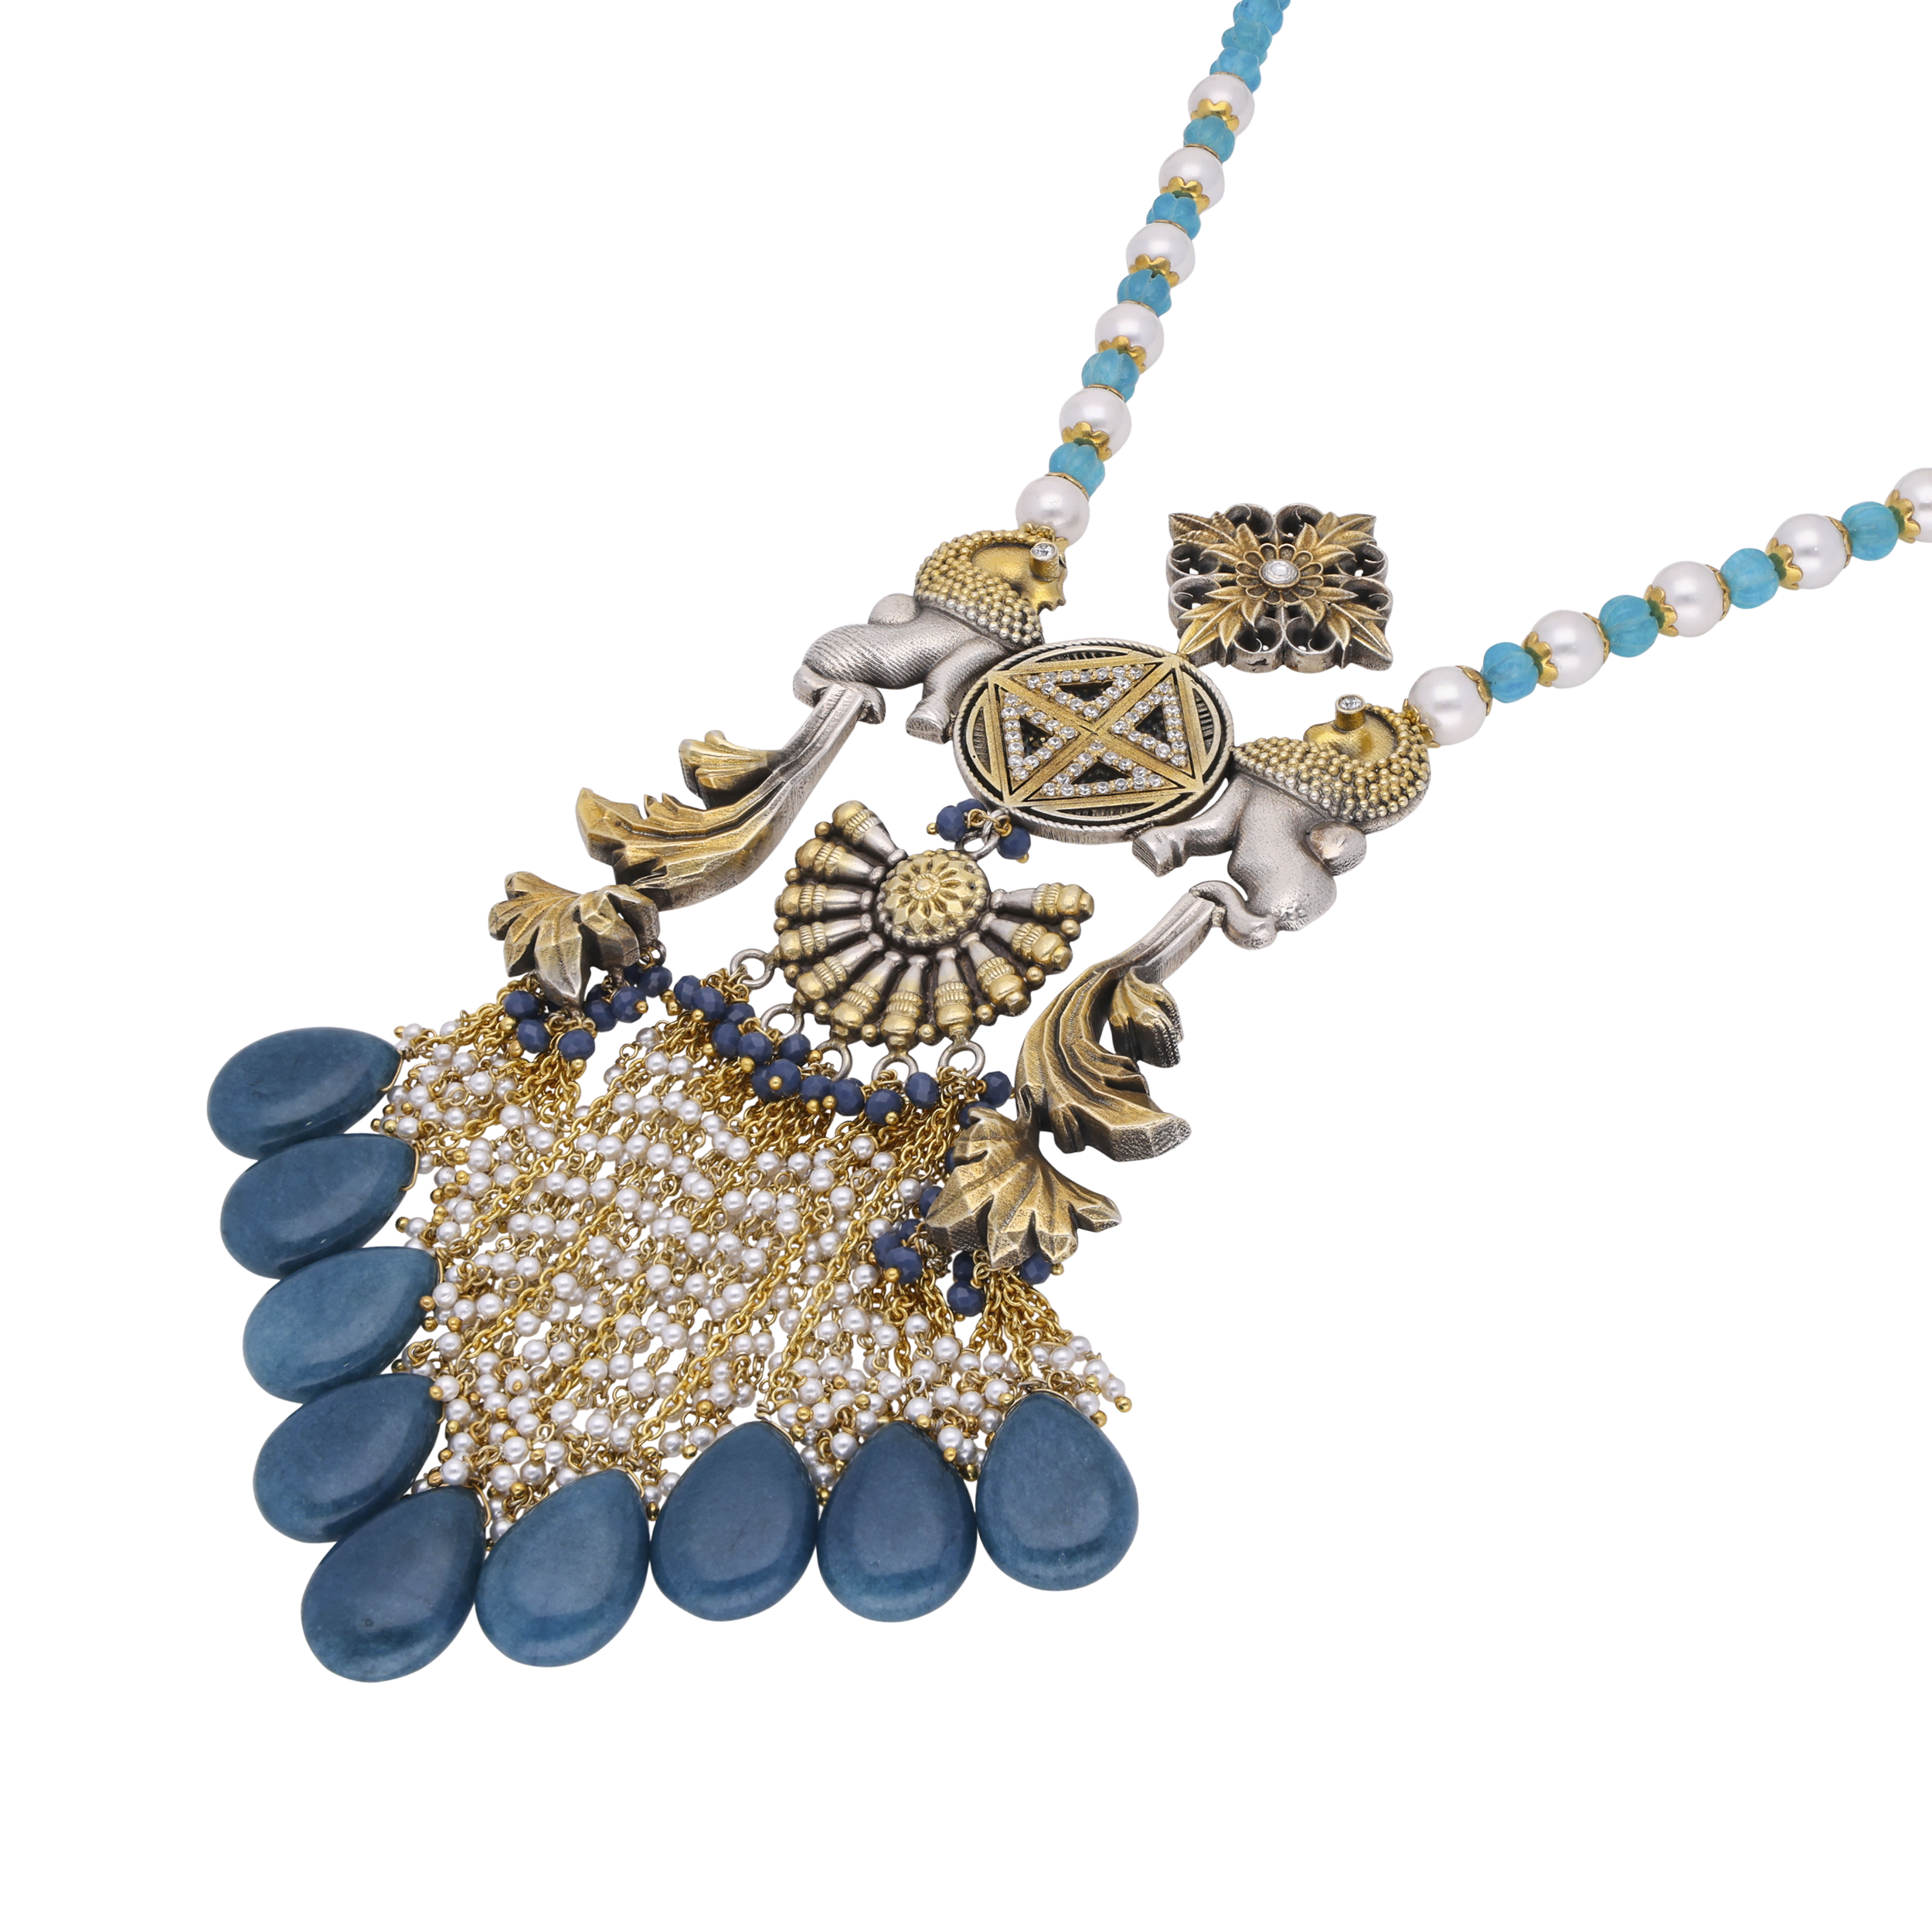 Intricately Designed Sterling Silver Pendant Chain with Gemstone Accent | SKU : 0020338718